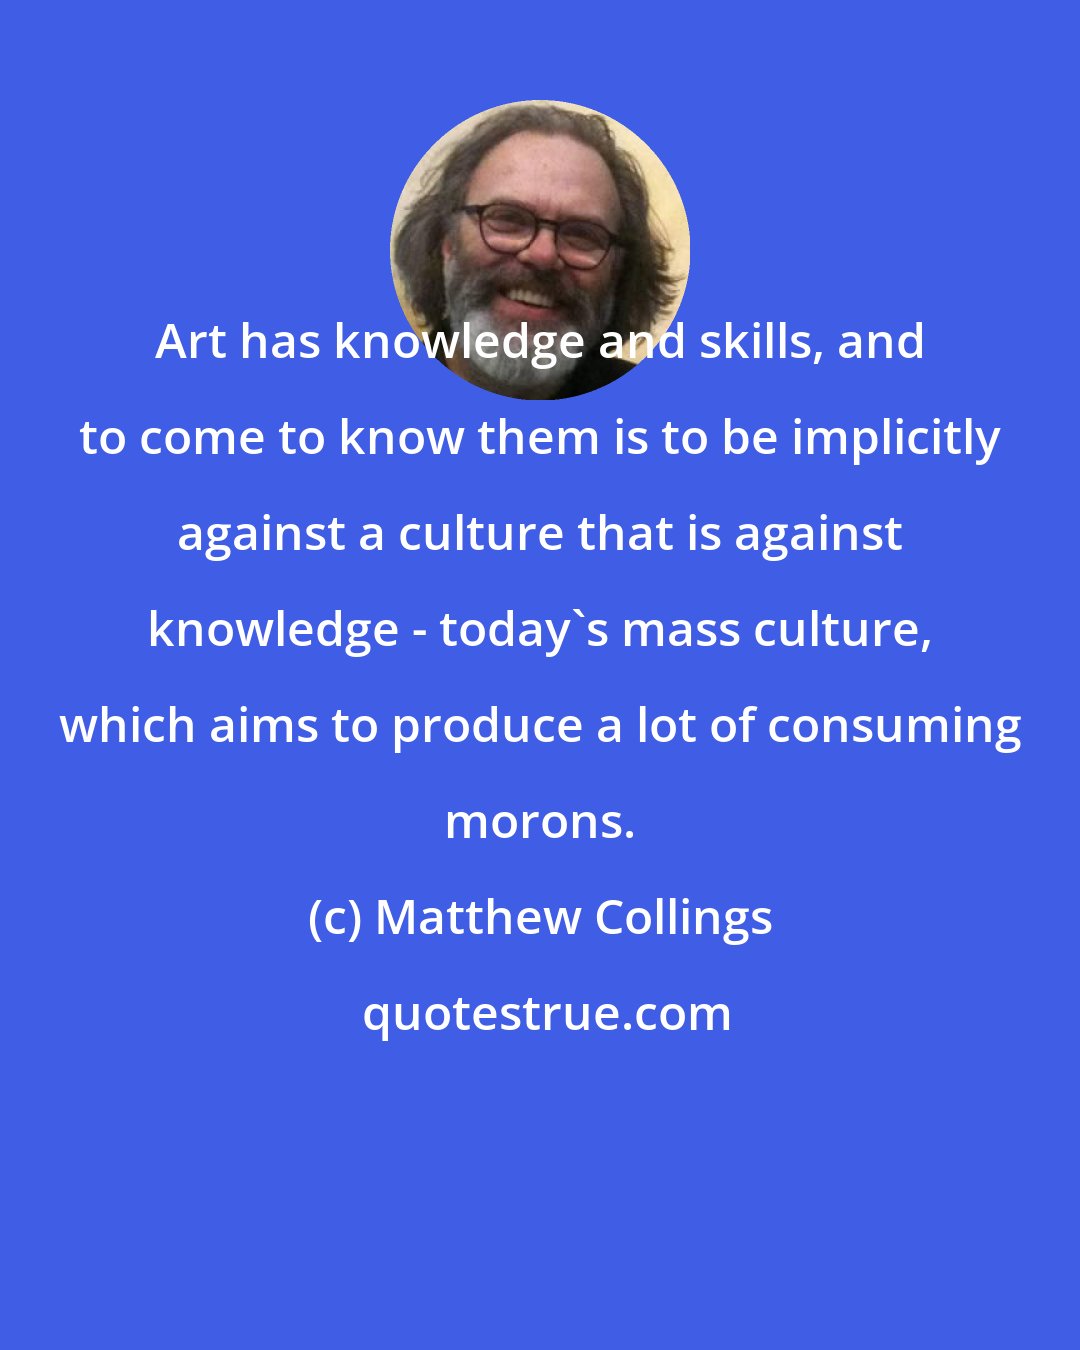 Matthew Collings: Art has knowledge and skills, and to come to know them is to be implicitly against a culture that is against knowledge - today's mass culture, which aims to produce a lot of consuming morons.